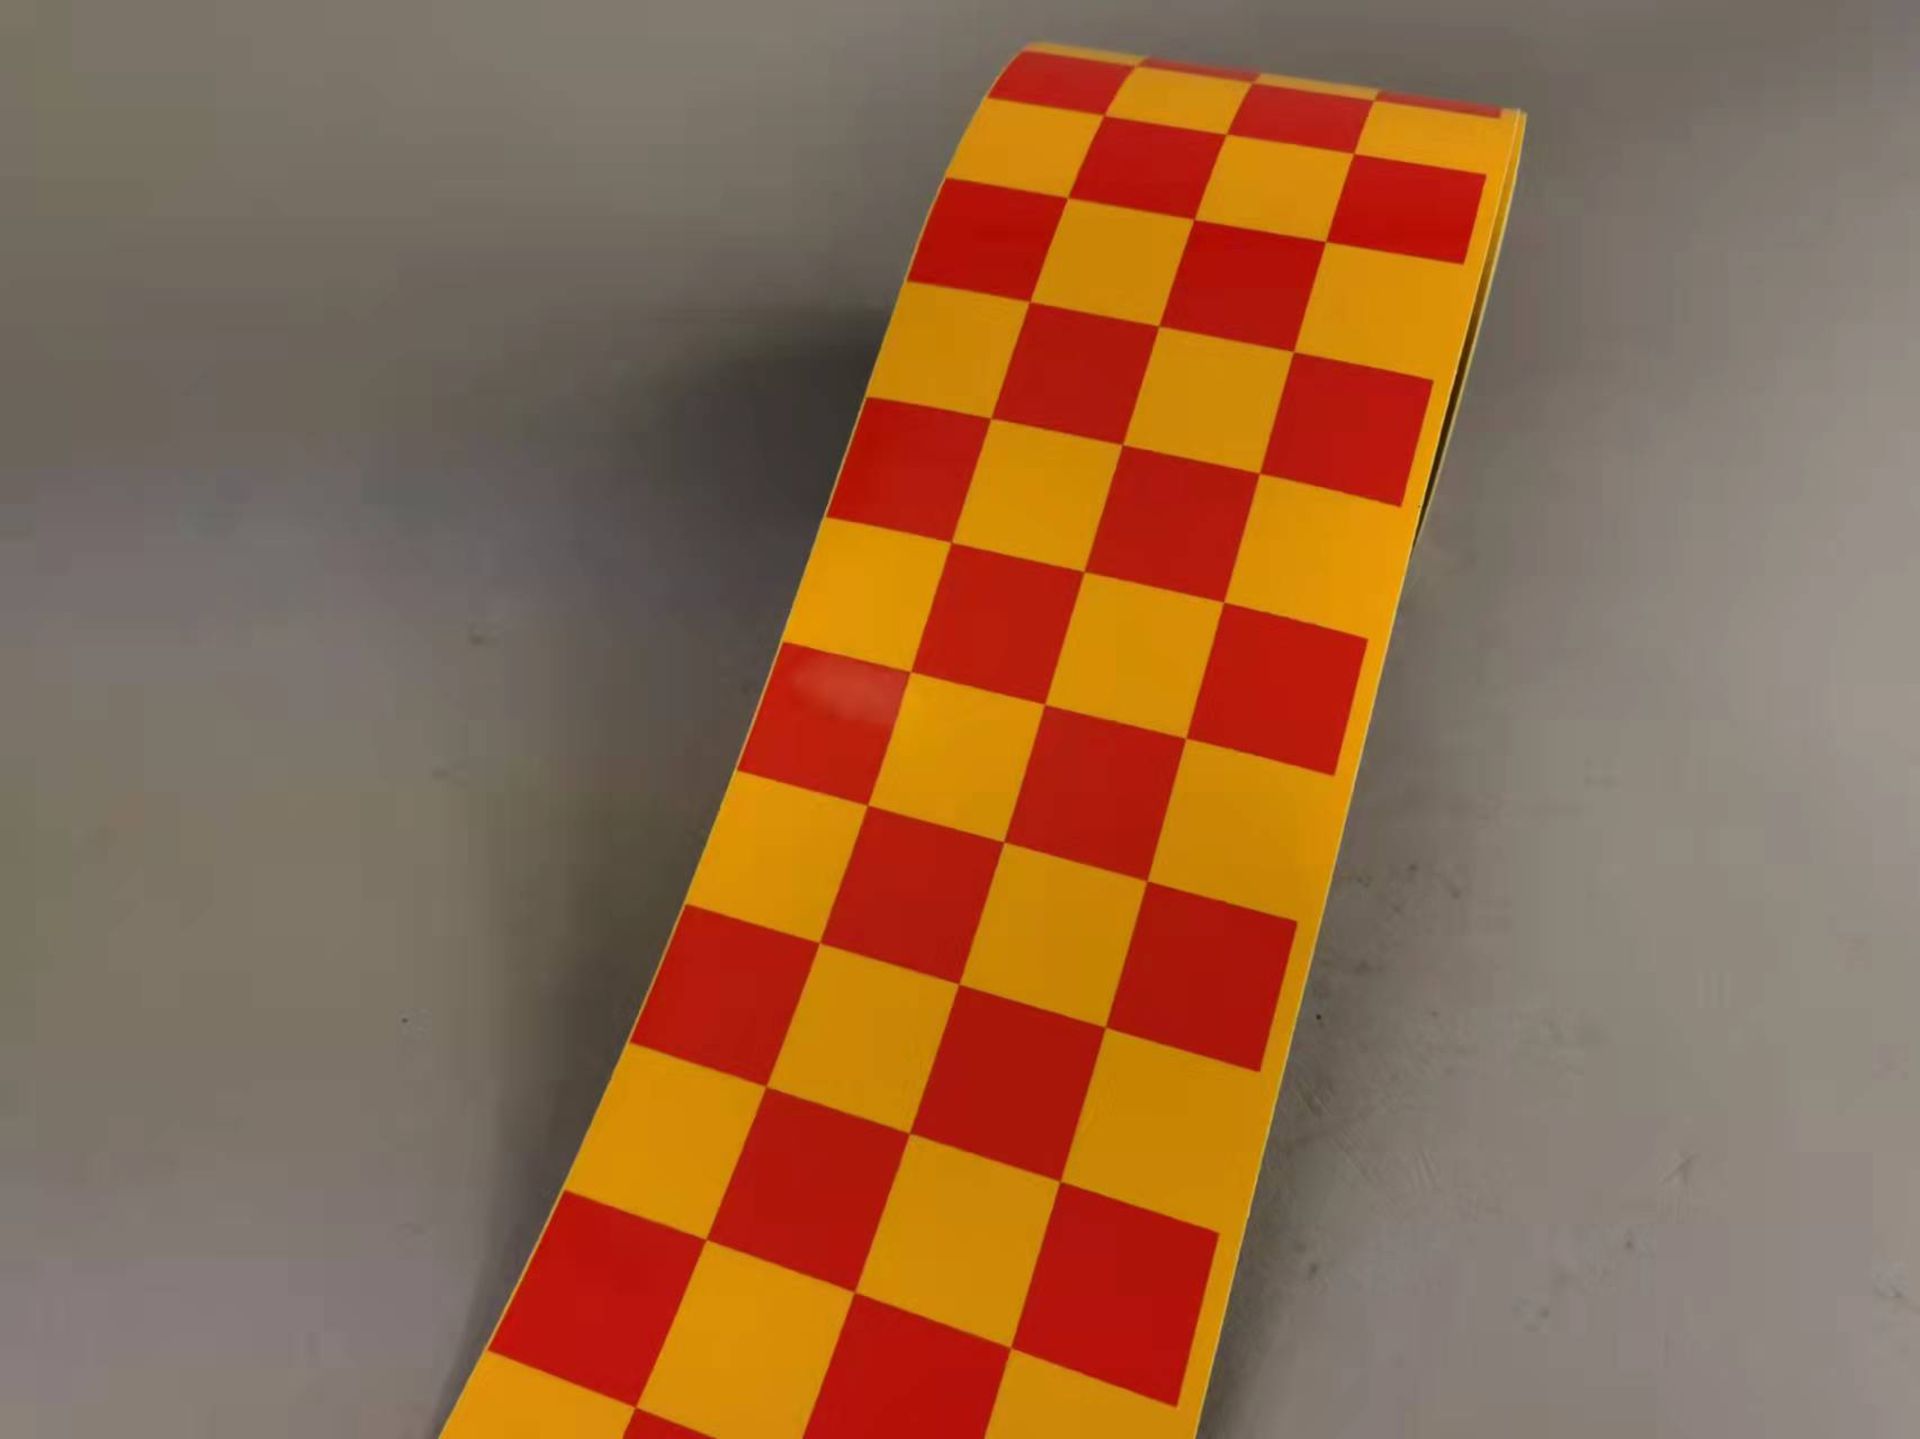 New Red/Yellow Reflective Chequered Tape 100mm*45m Roll - Image 2 of 2